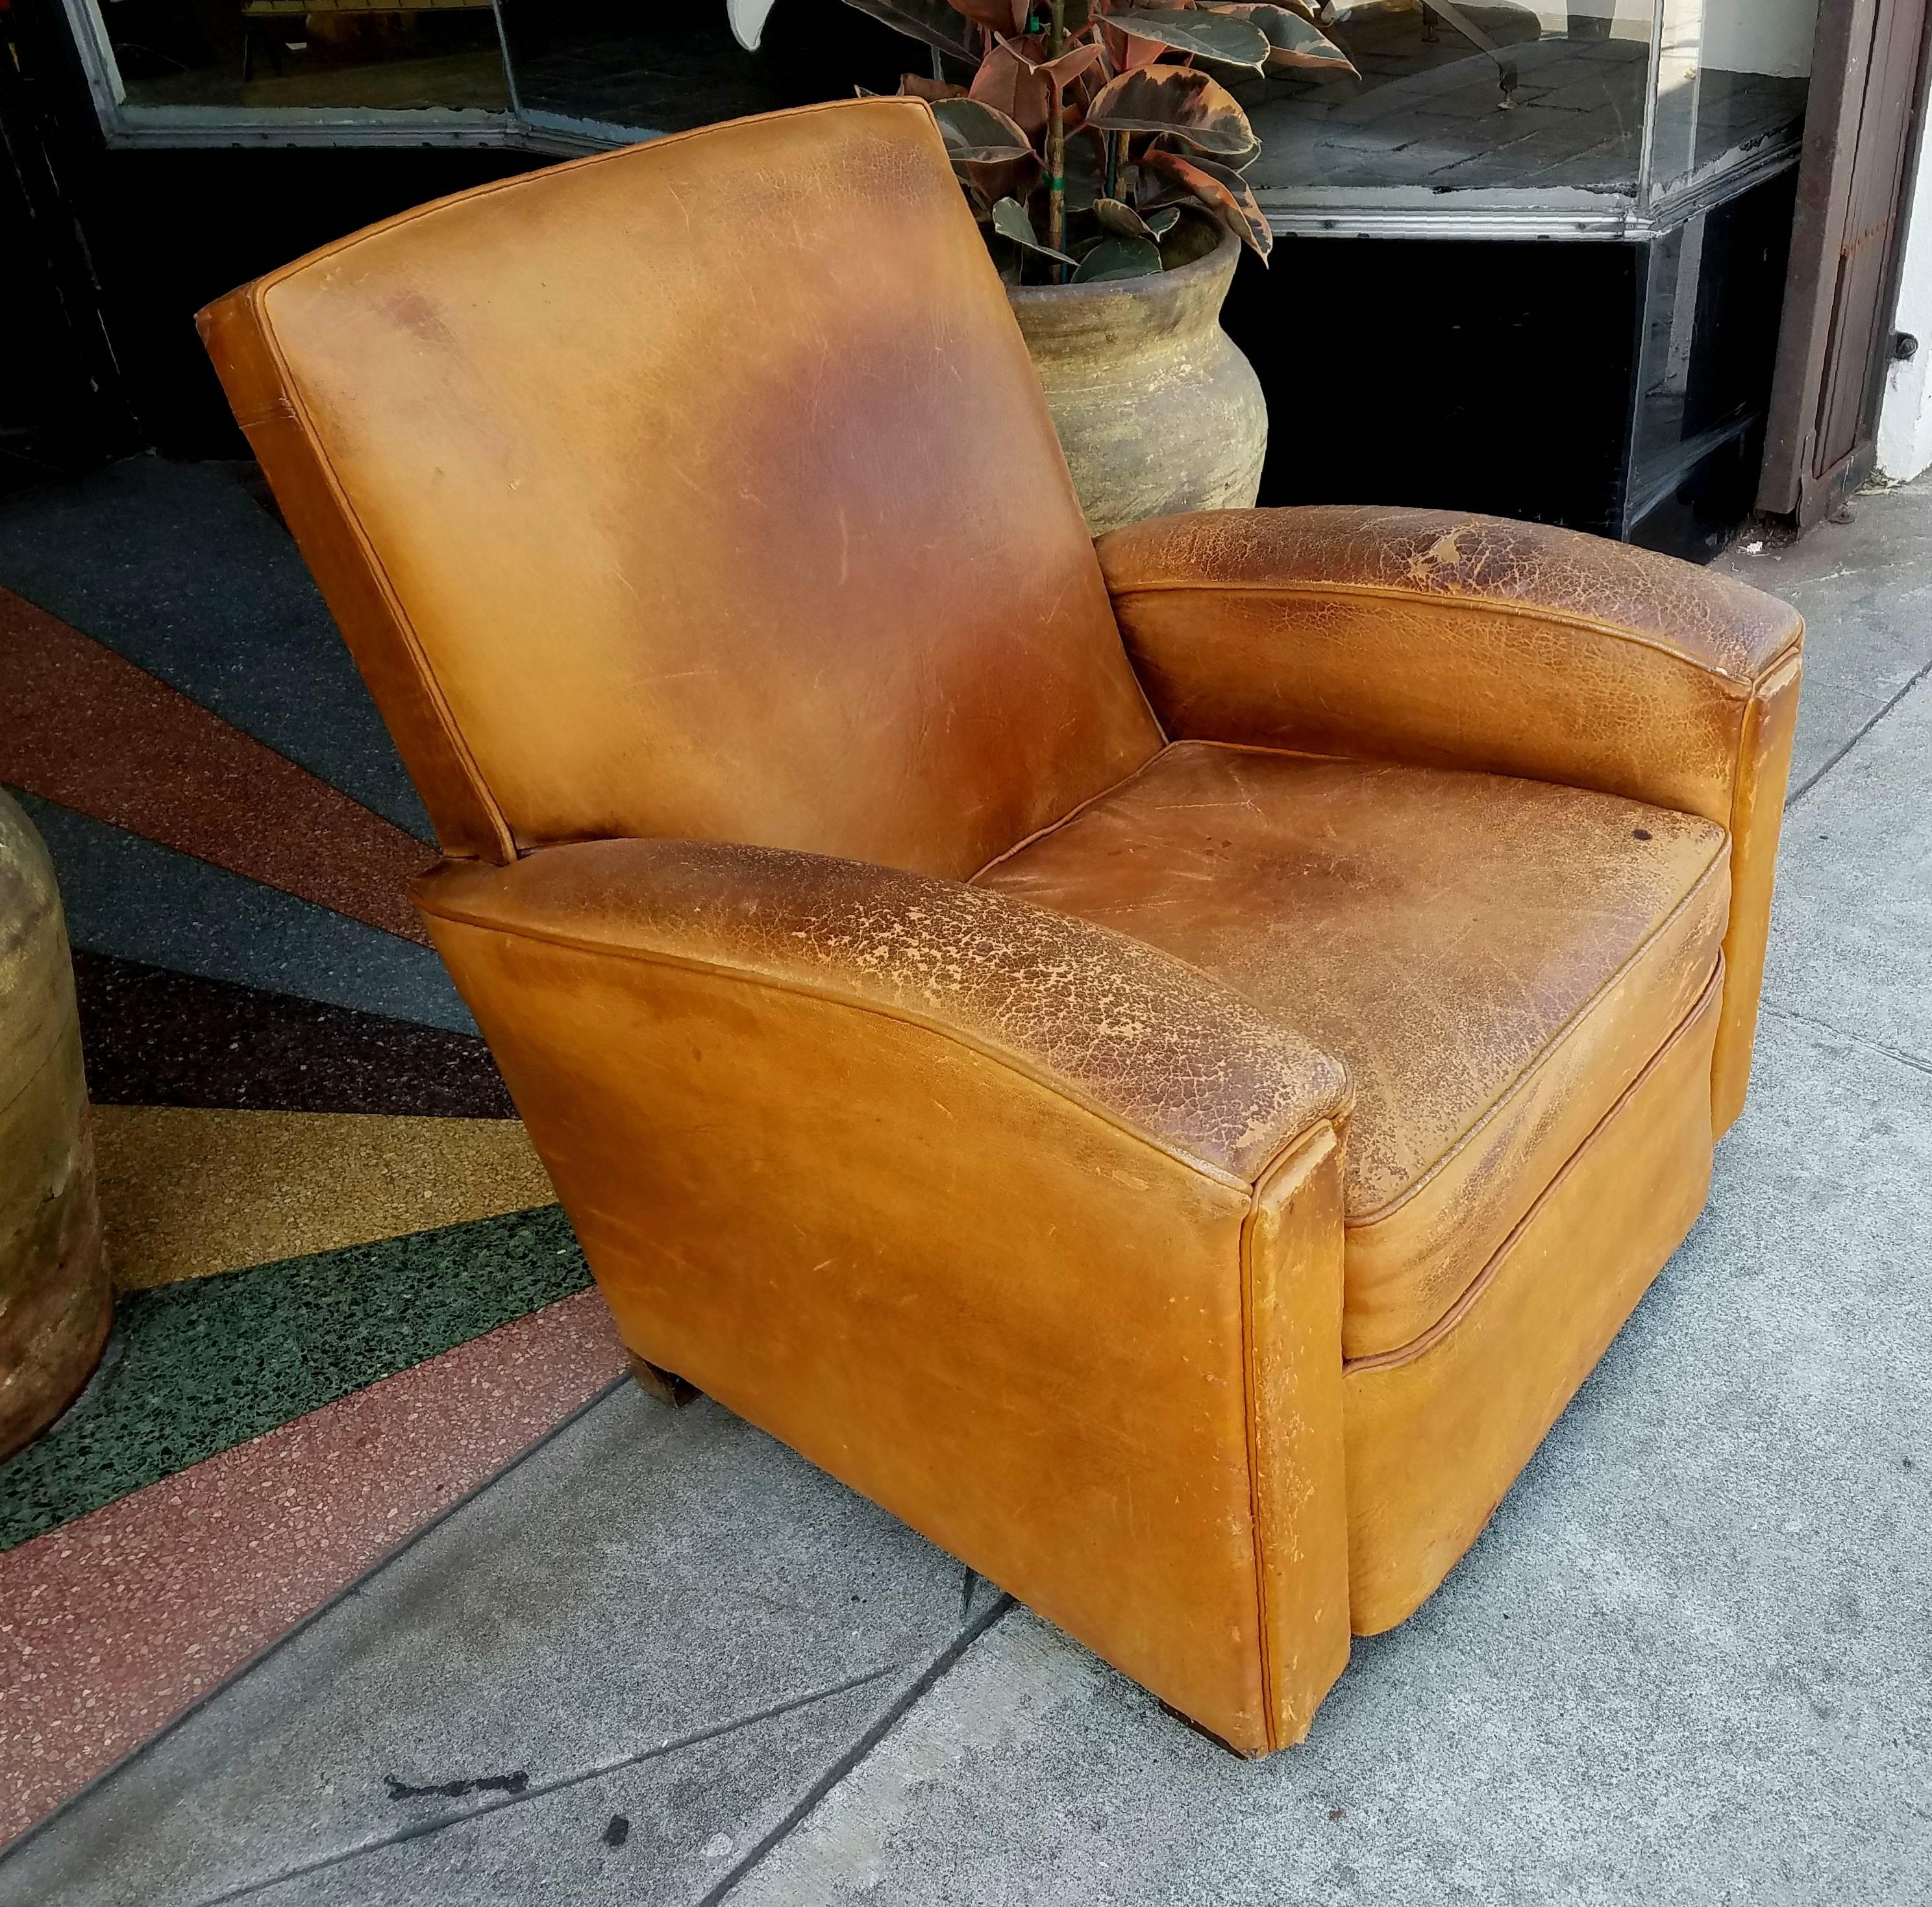 Mid-20th Century French Art Deco Leather Club Chair